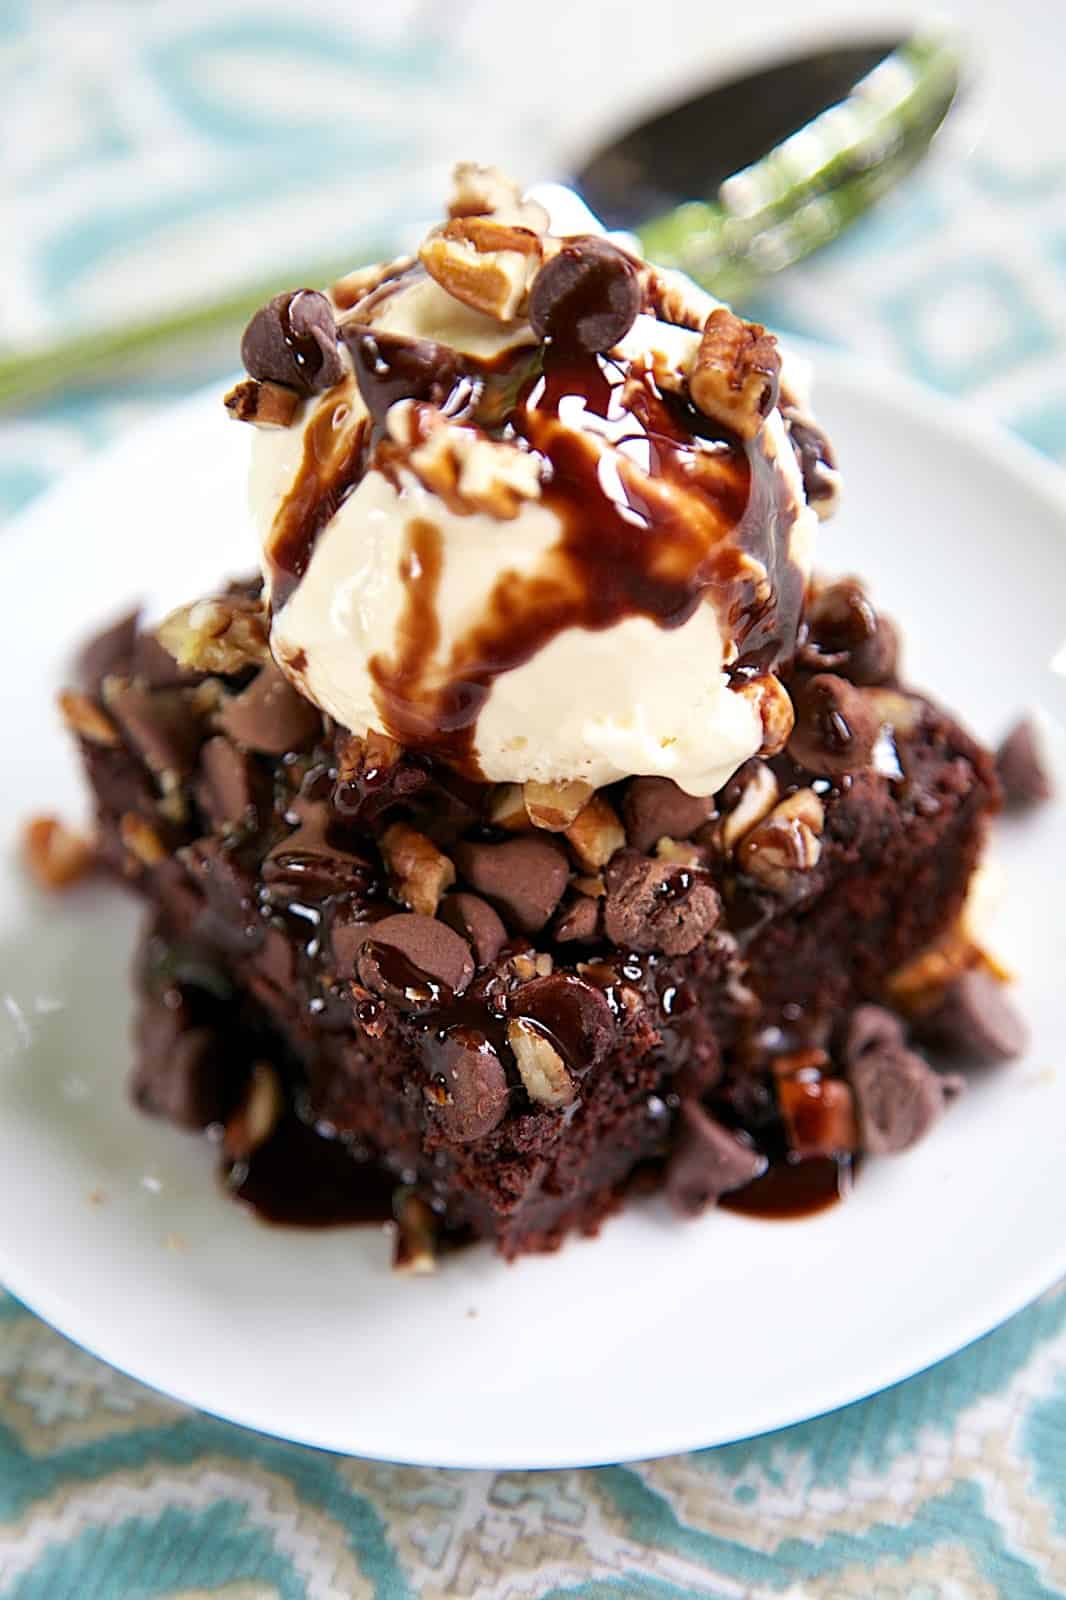 Triple Chocolate Pudding Cake Recipe - only 5 simple ingredients! Pudding, Milk, Cake Mix, Chocolate Chips and Pecans - makes a wonderful fudgy cake! Great topped with ice cream and chocolate sauce.